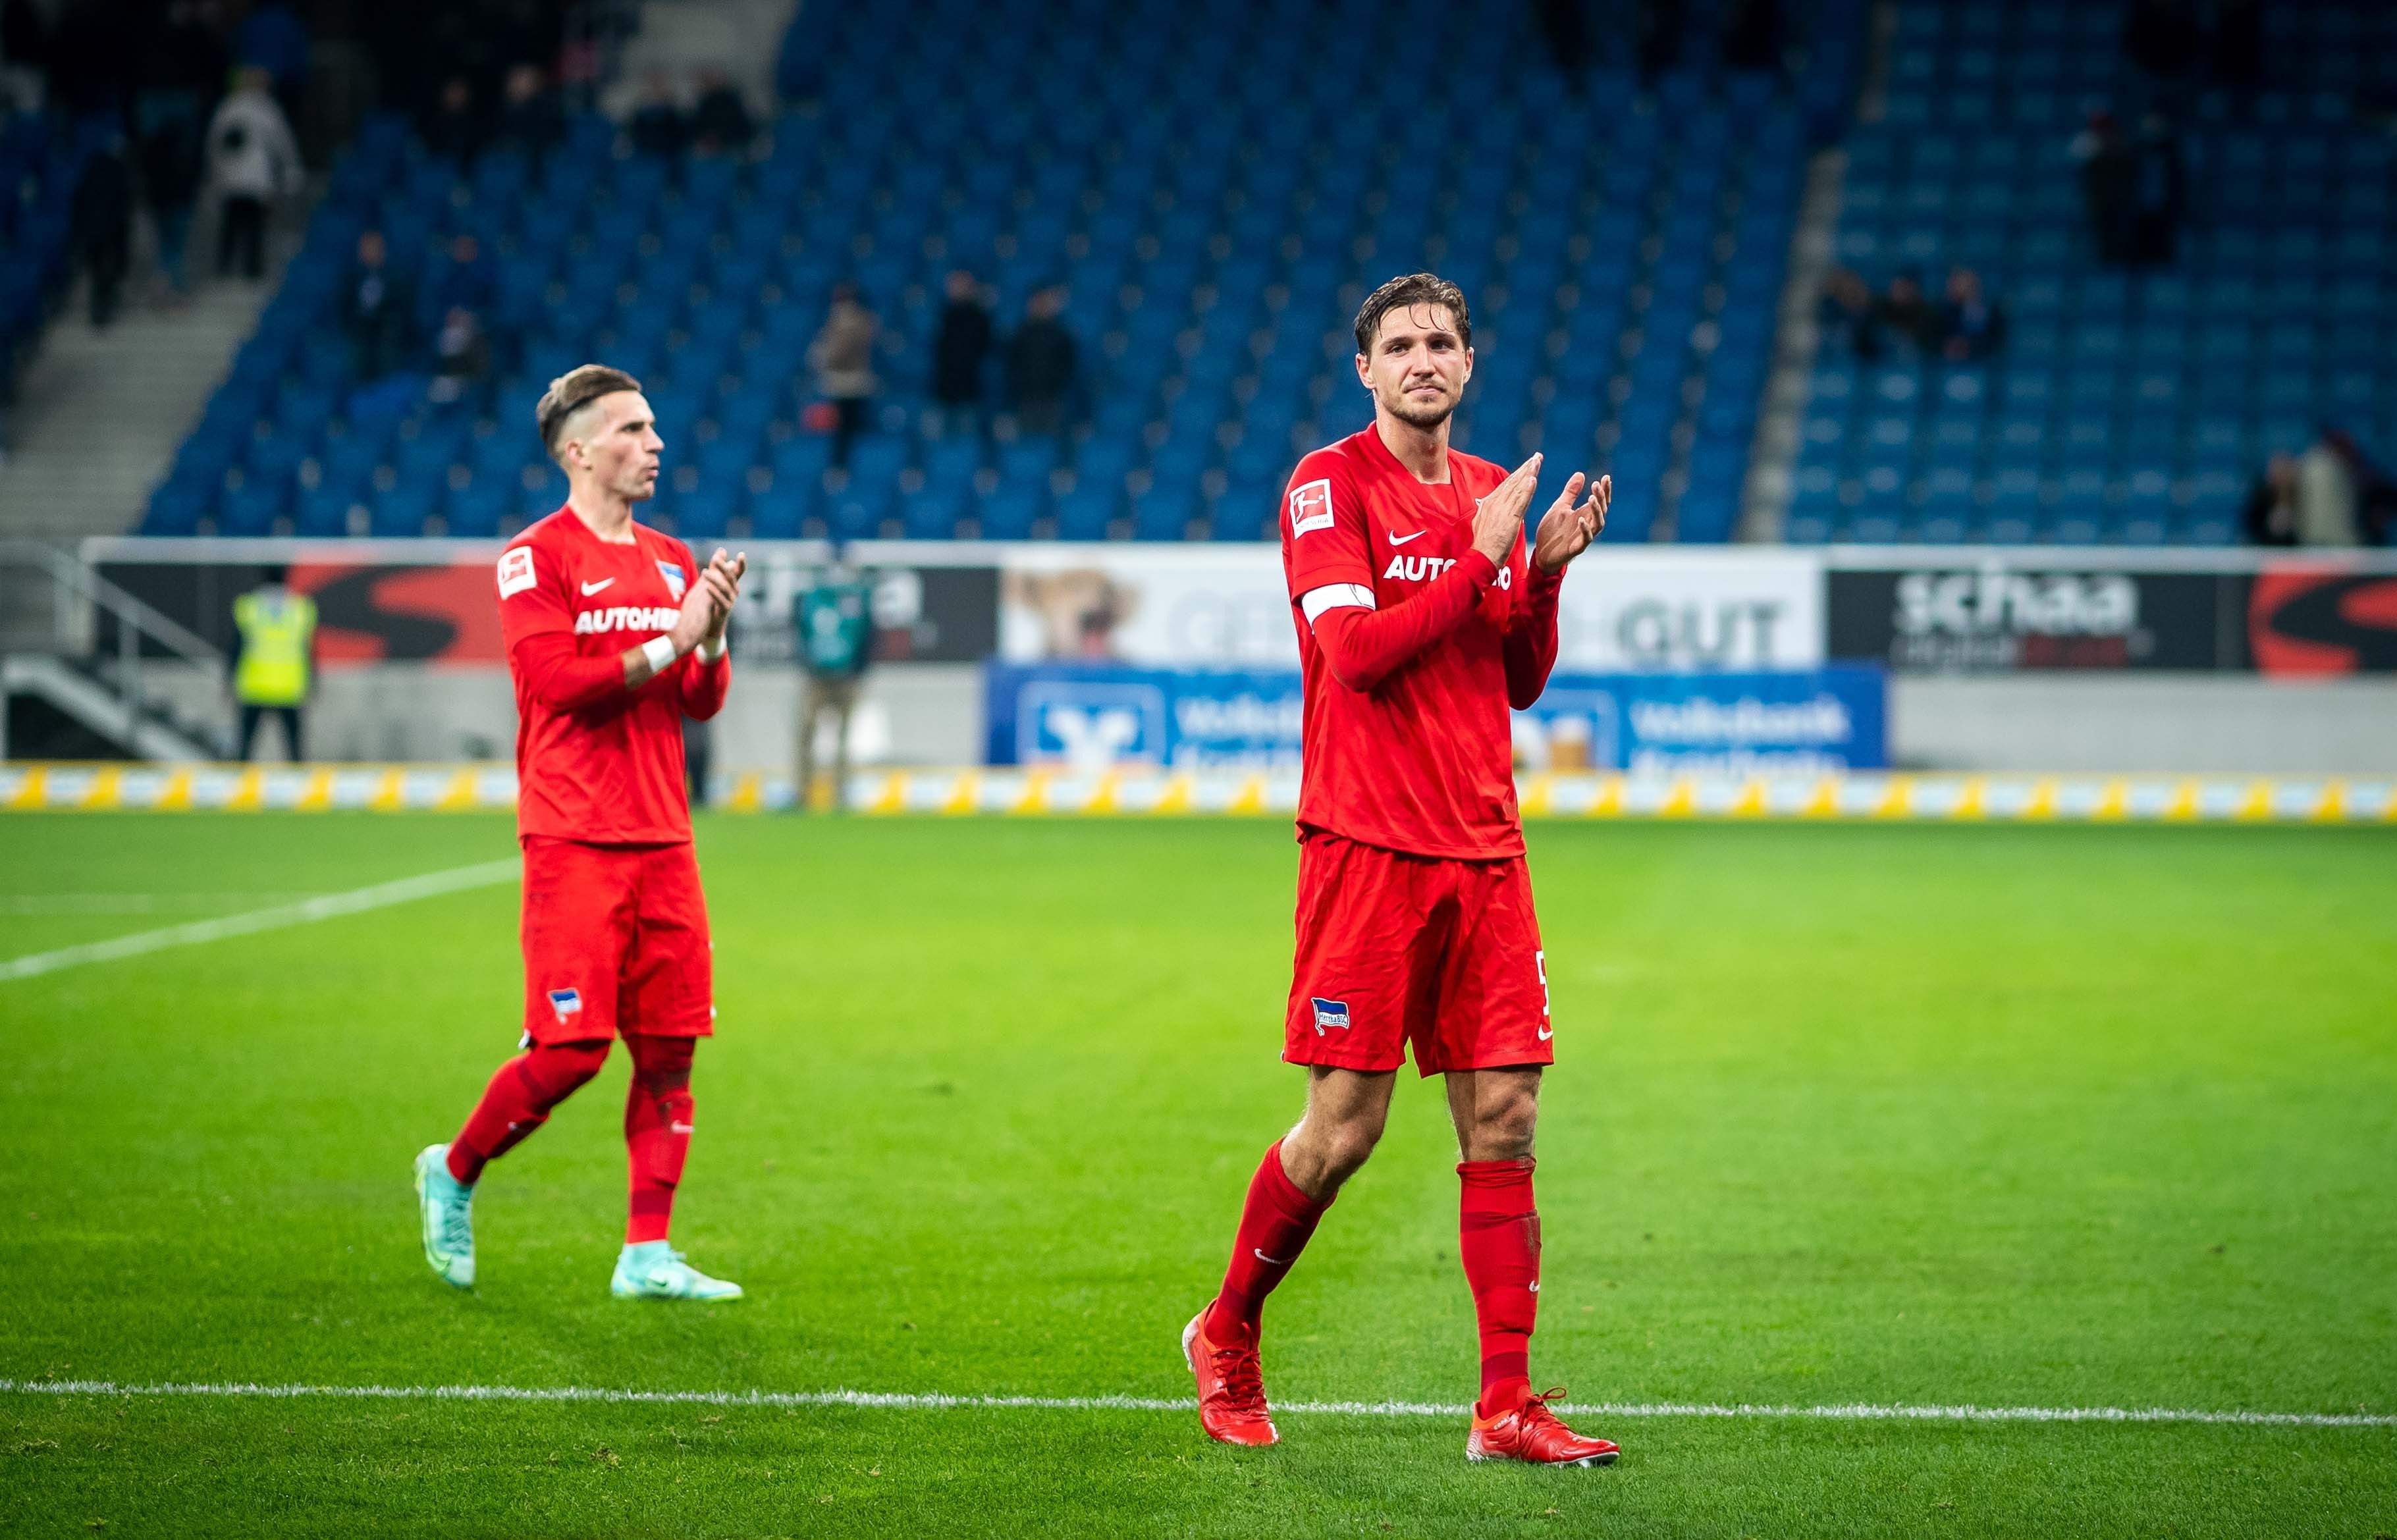 Niklas Stark thanks the fans who travelled to watch the game.